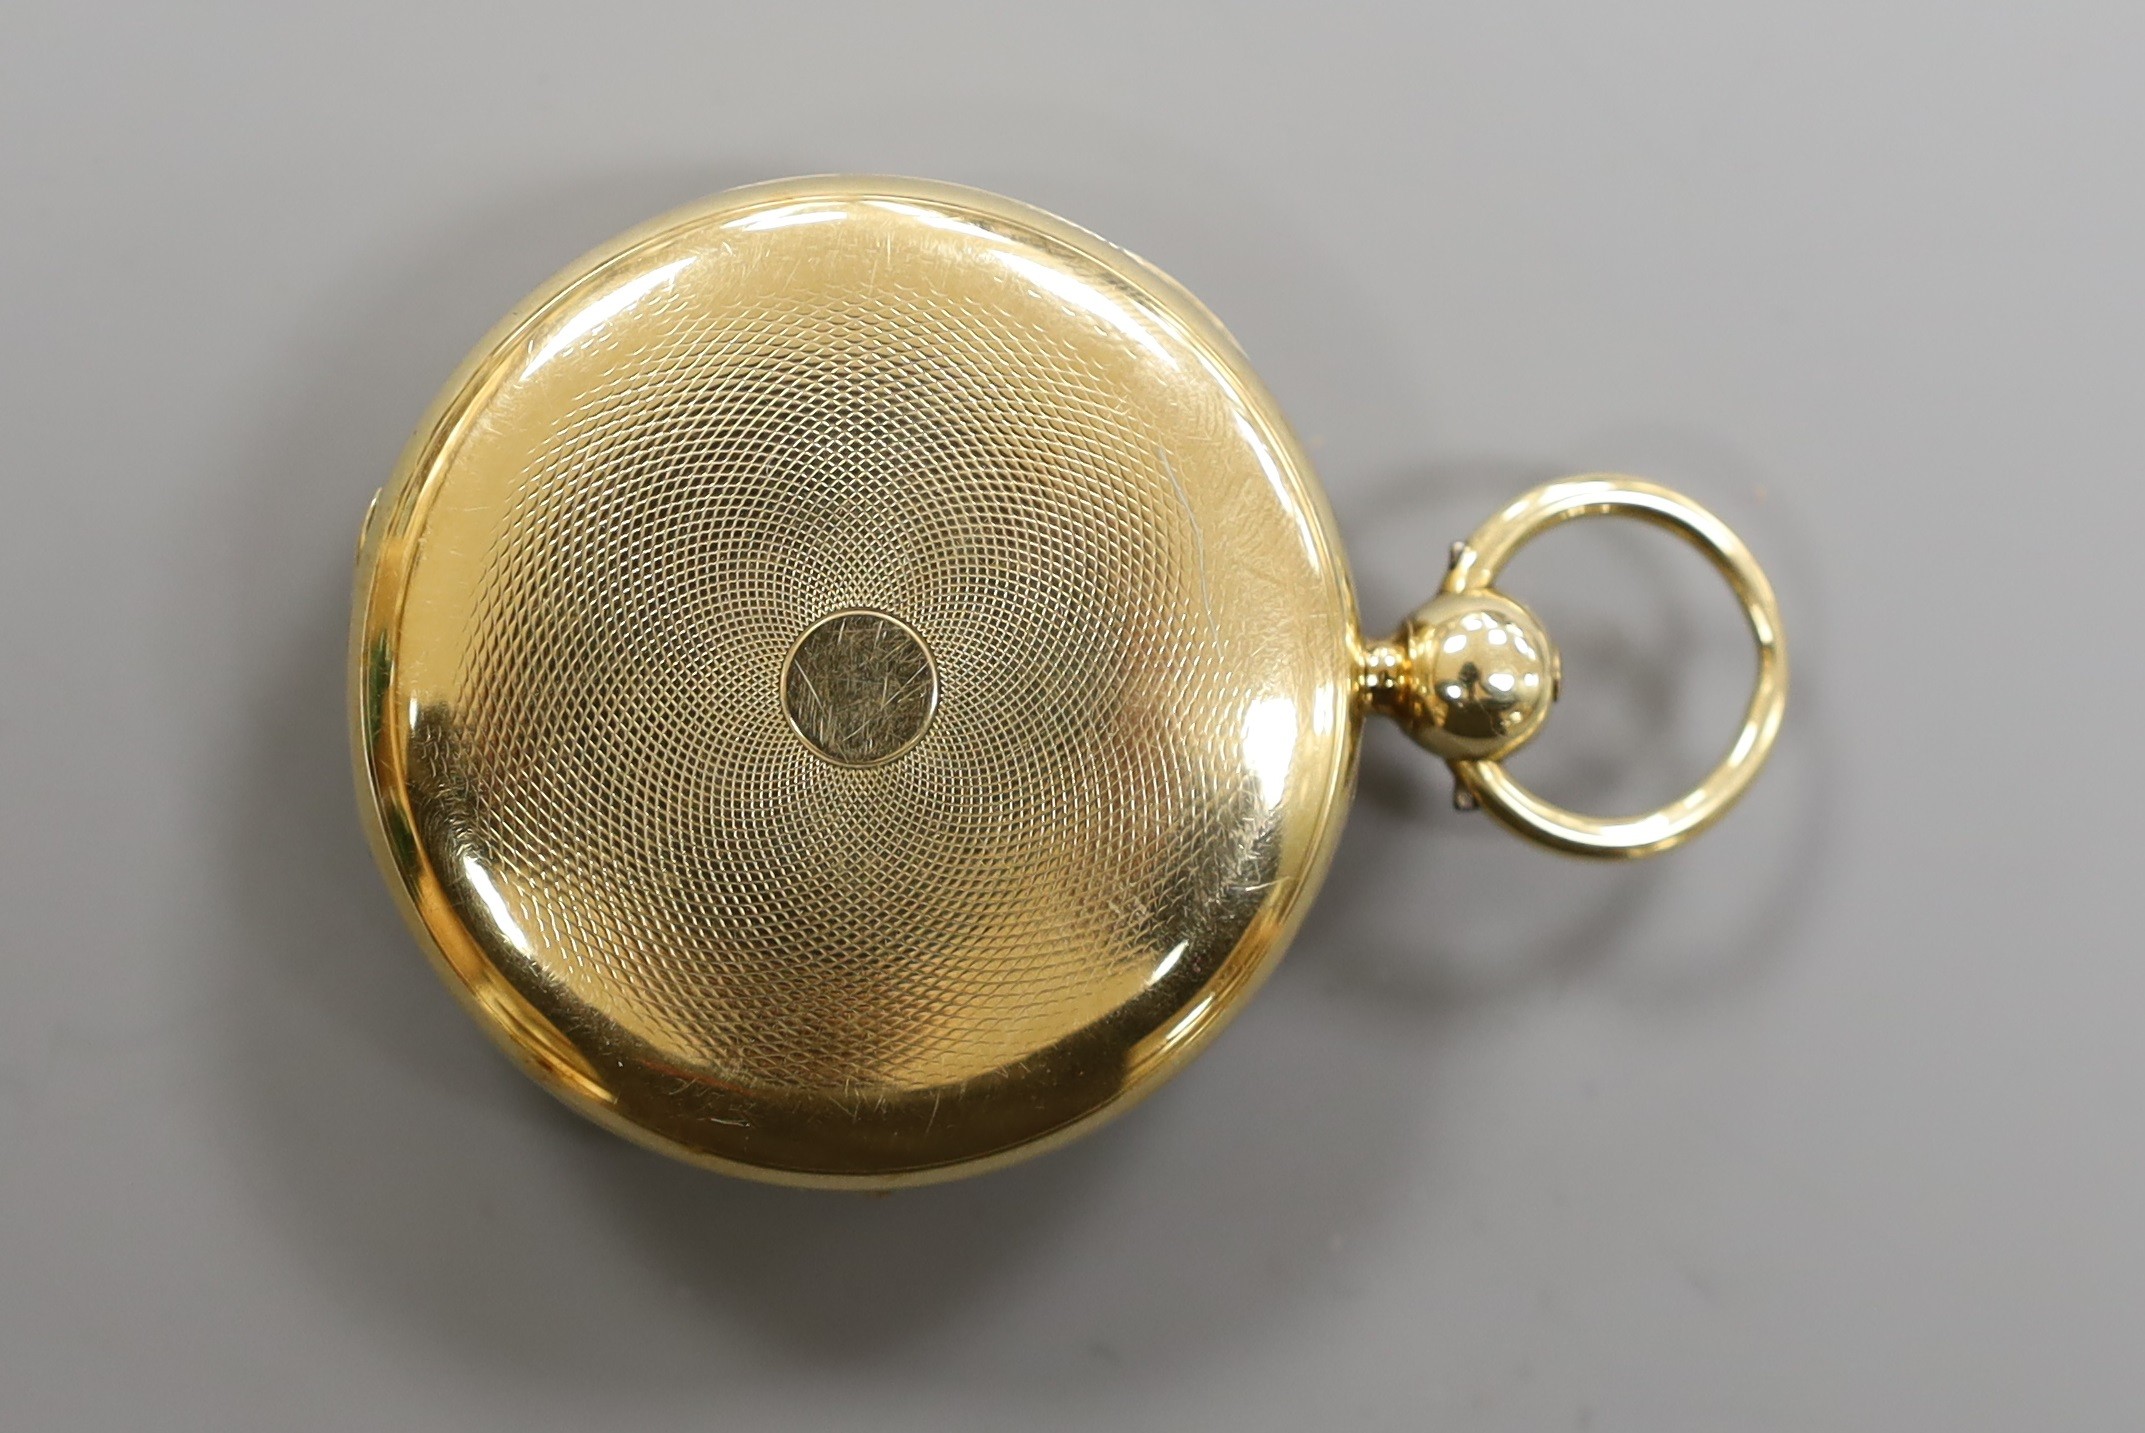 An 18ct gold open faced keywind pocket watch, by K.H. Jones, Liverpool, with Roman dial and subsidiary seconds, case diameter 46mm